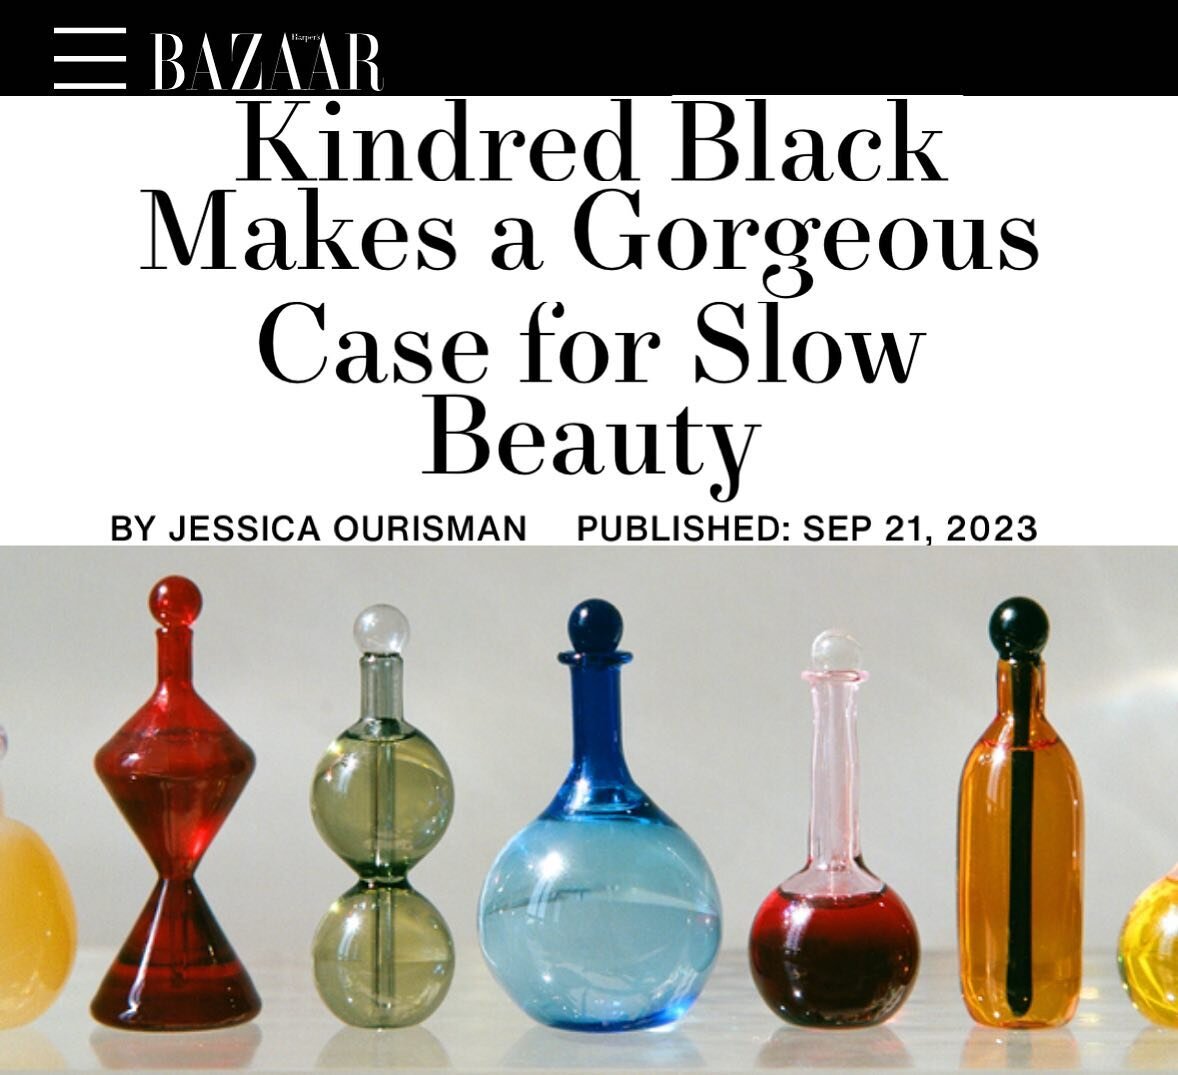 Slow beauty is a conscious and mindful approach first coined by the lovely founder of @sparitualist. The like-minded luxury slow beauty brand @kindredblack launched their refill program today, ensuring that their one-of-a-kind, hand blown glass vesse